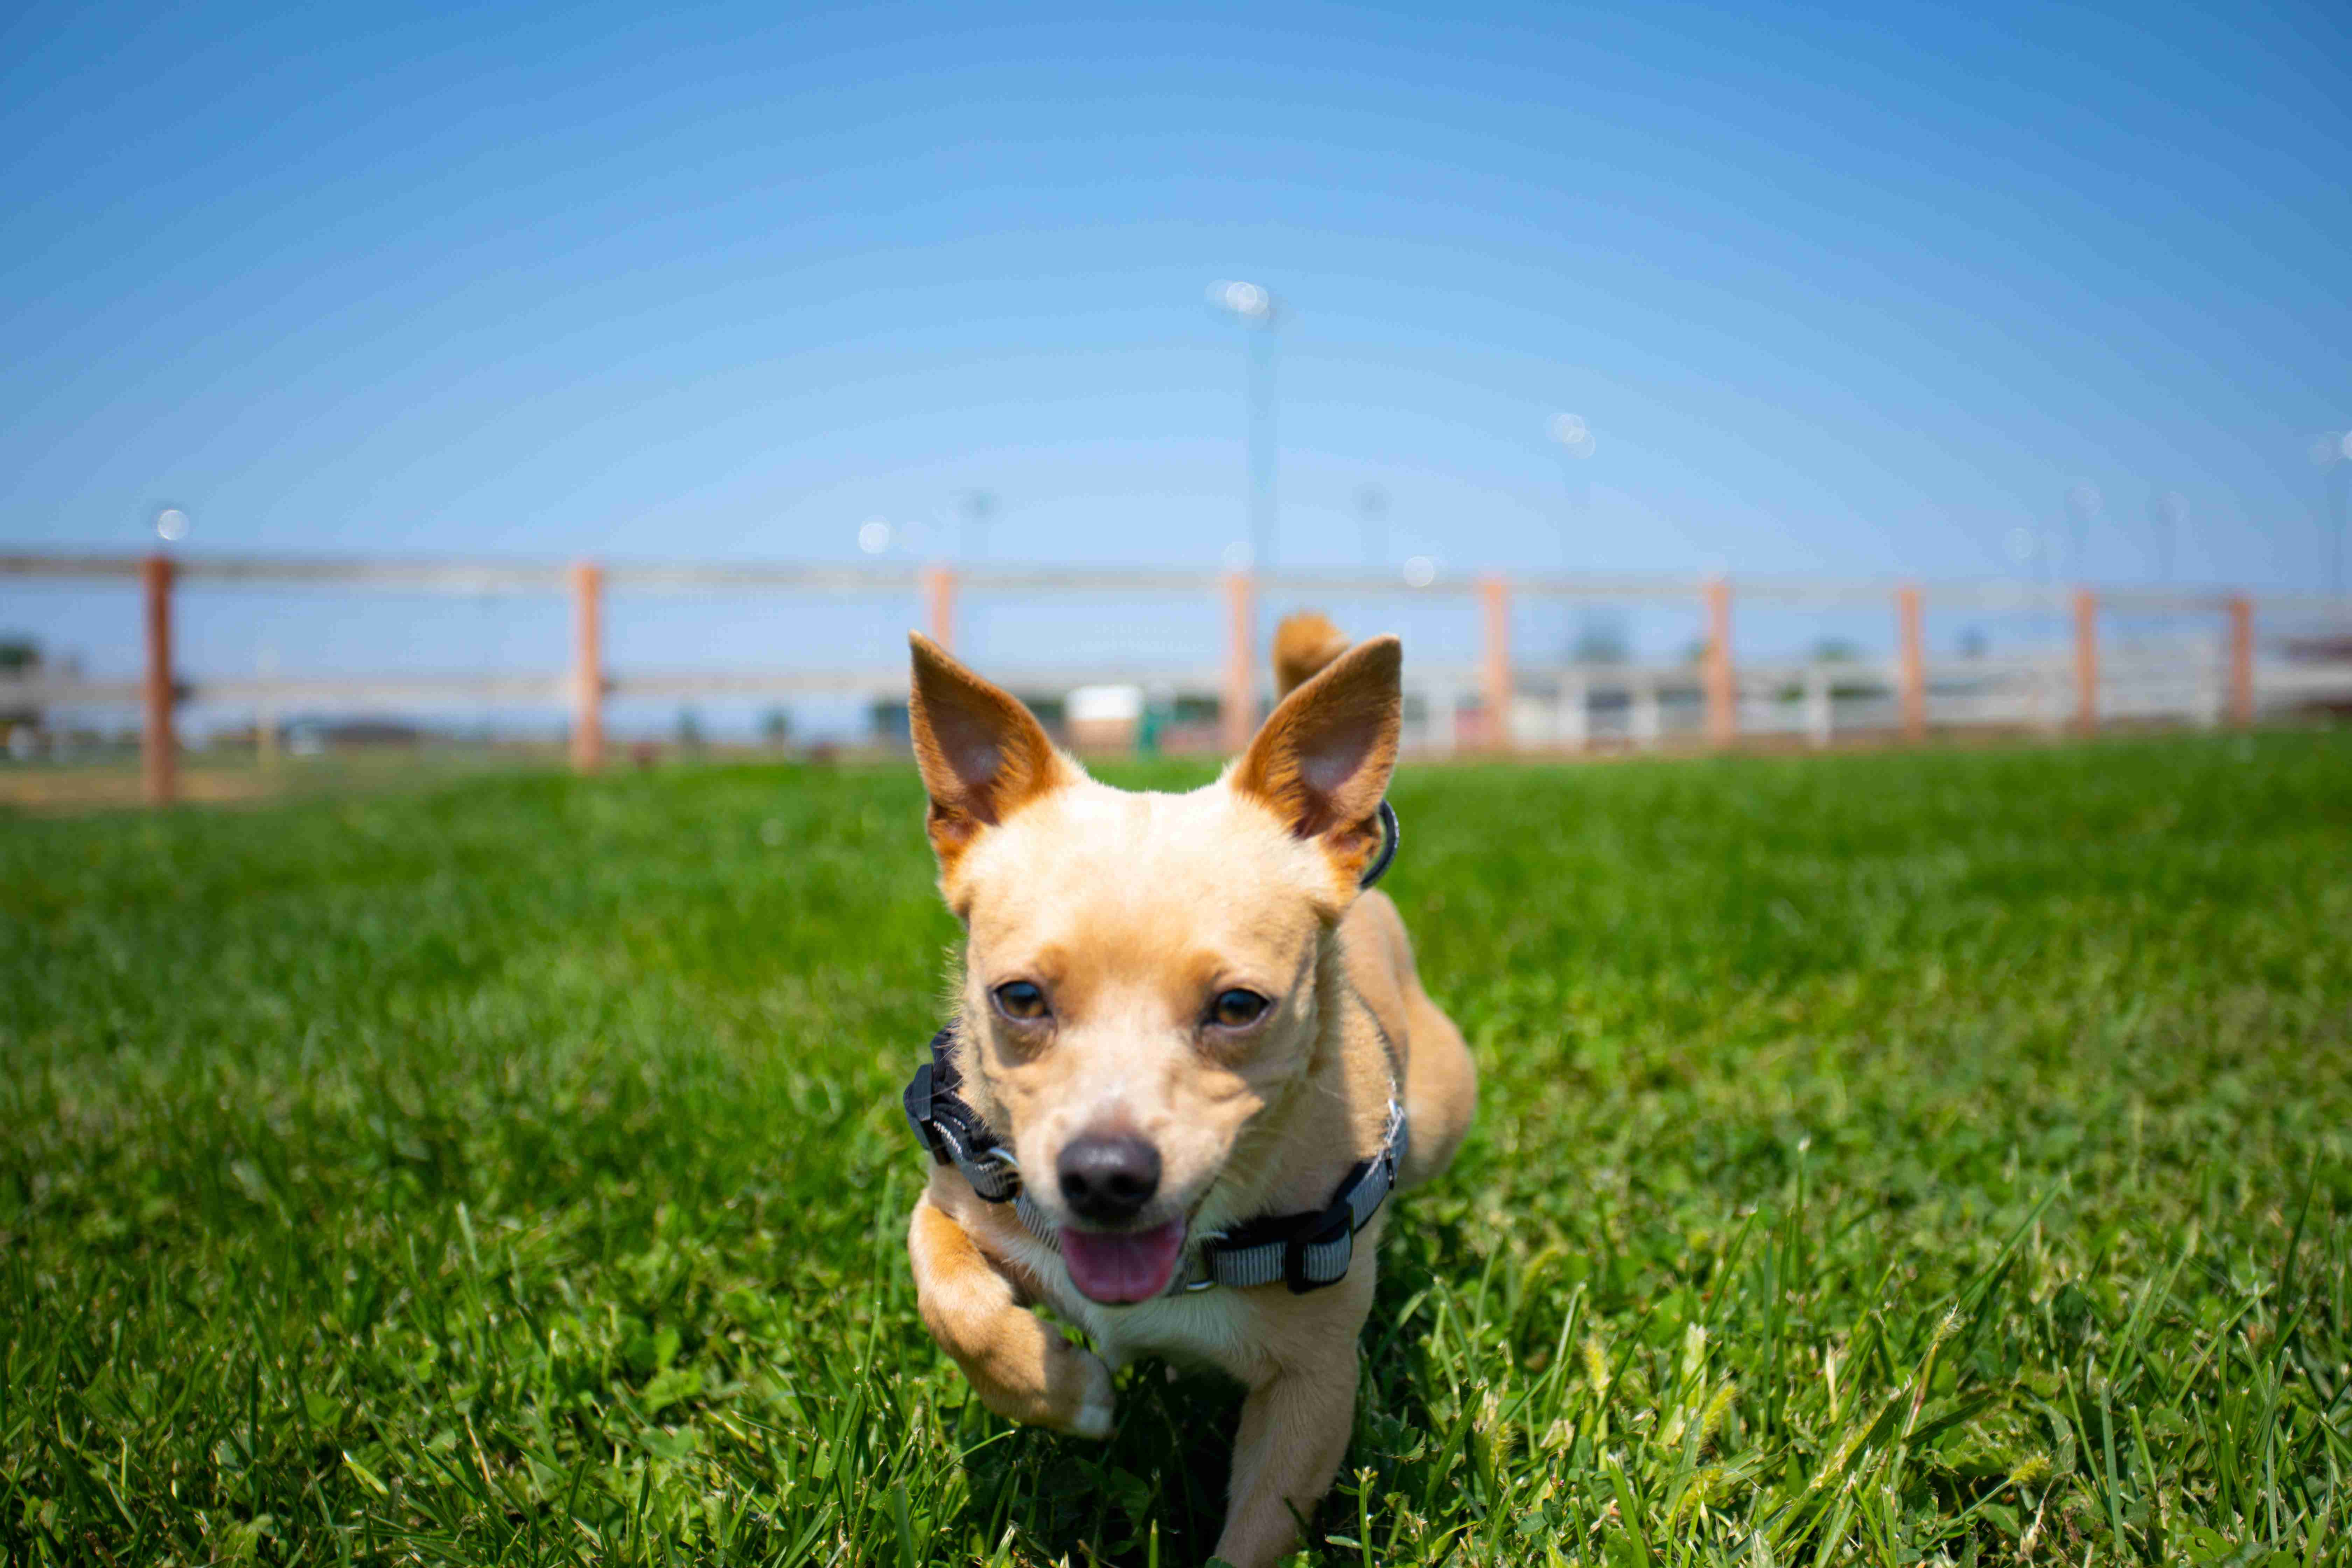 Can anger issues in Chihuahuas be triggered by a lack of mental stimulation or enrichment?